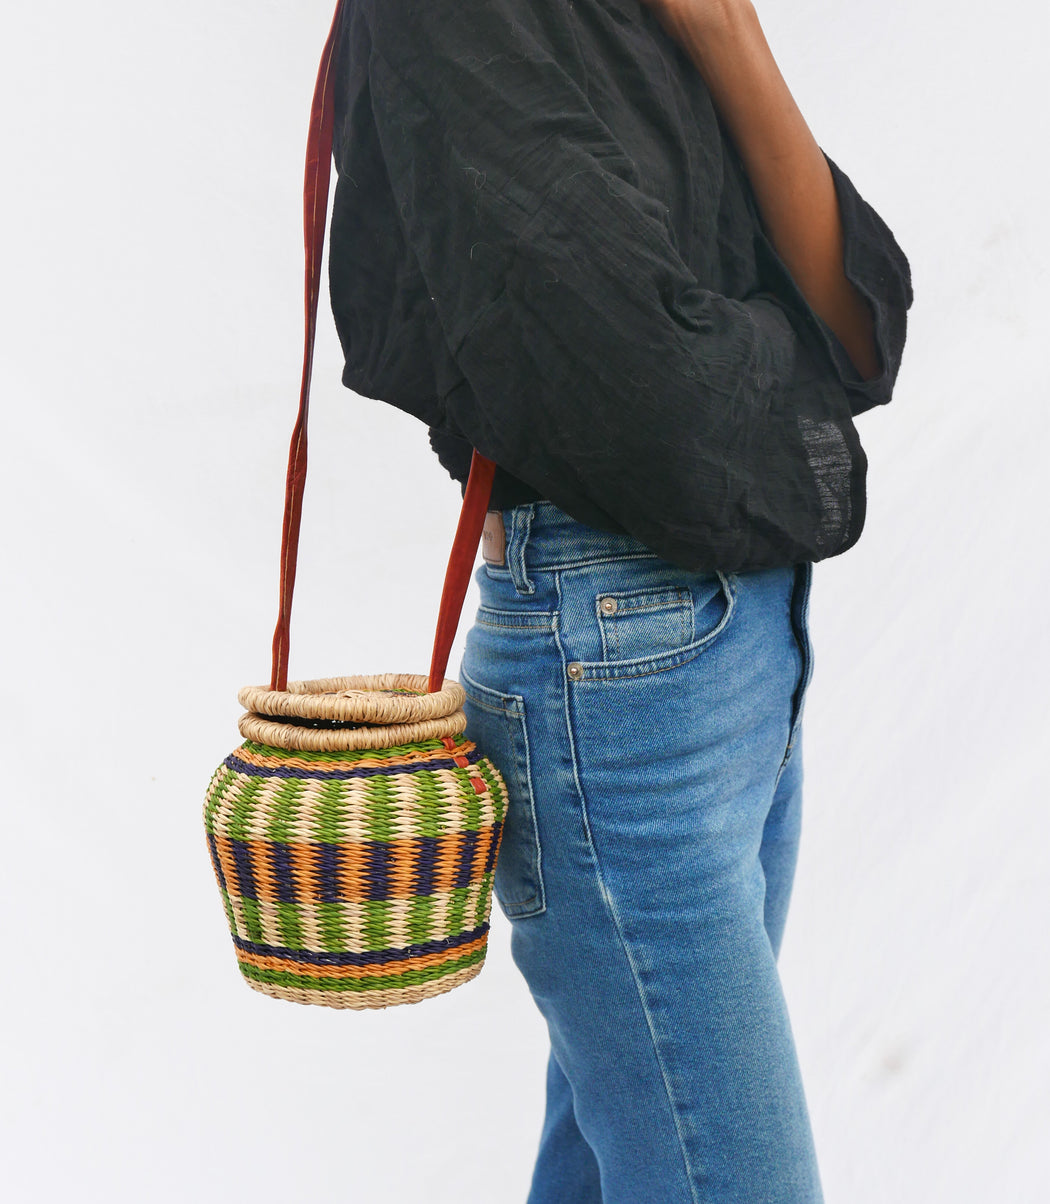 The multicolored Alobahe handbag is handwoven with straw called Kinkahe in Sherigu, Ghana. The shape is versatile and opens from the lid lifted vertical with an adjustable leather strap that can be worn as a crossbody or a handheld bag. This product supports a community with employment, educational opportunities for the children and improve the work environment.